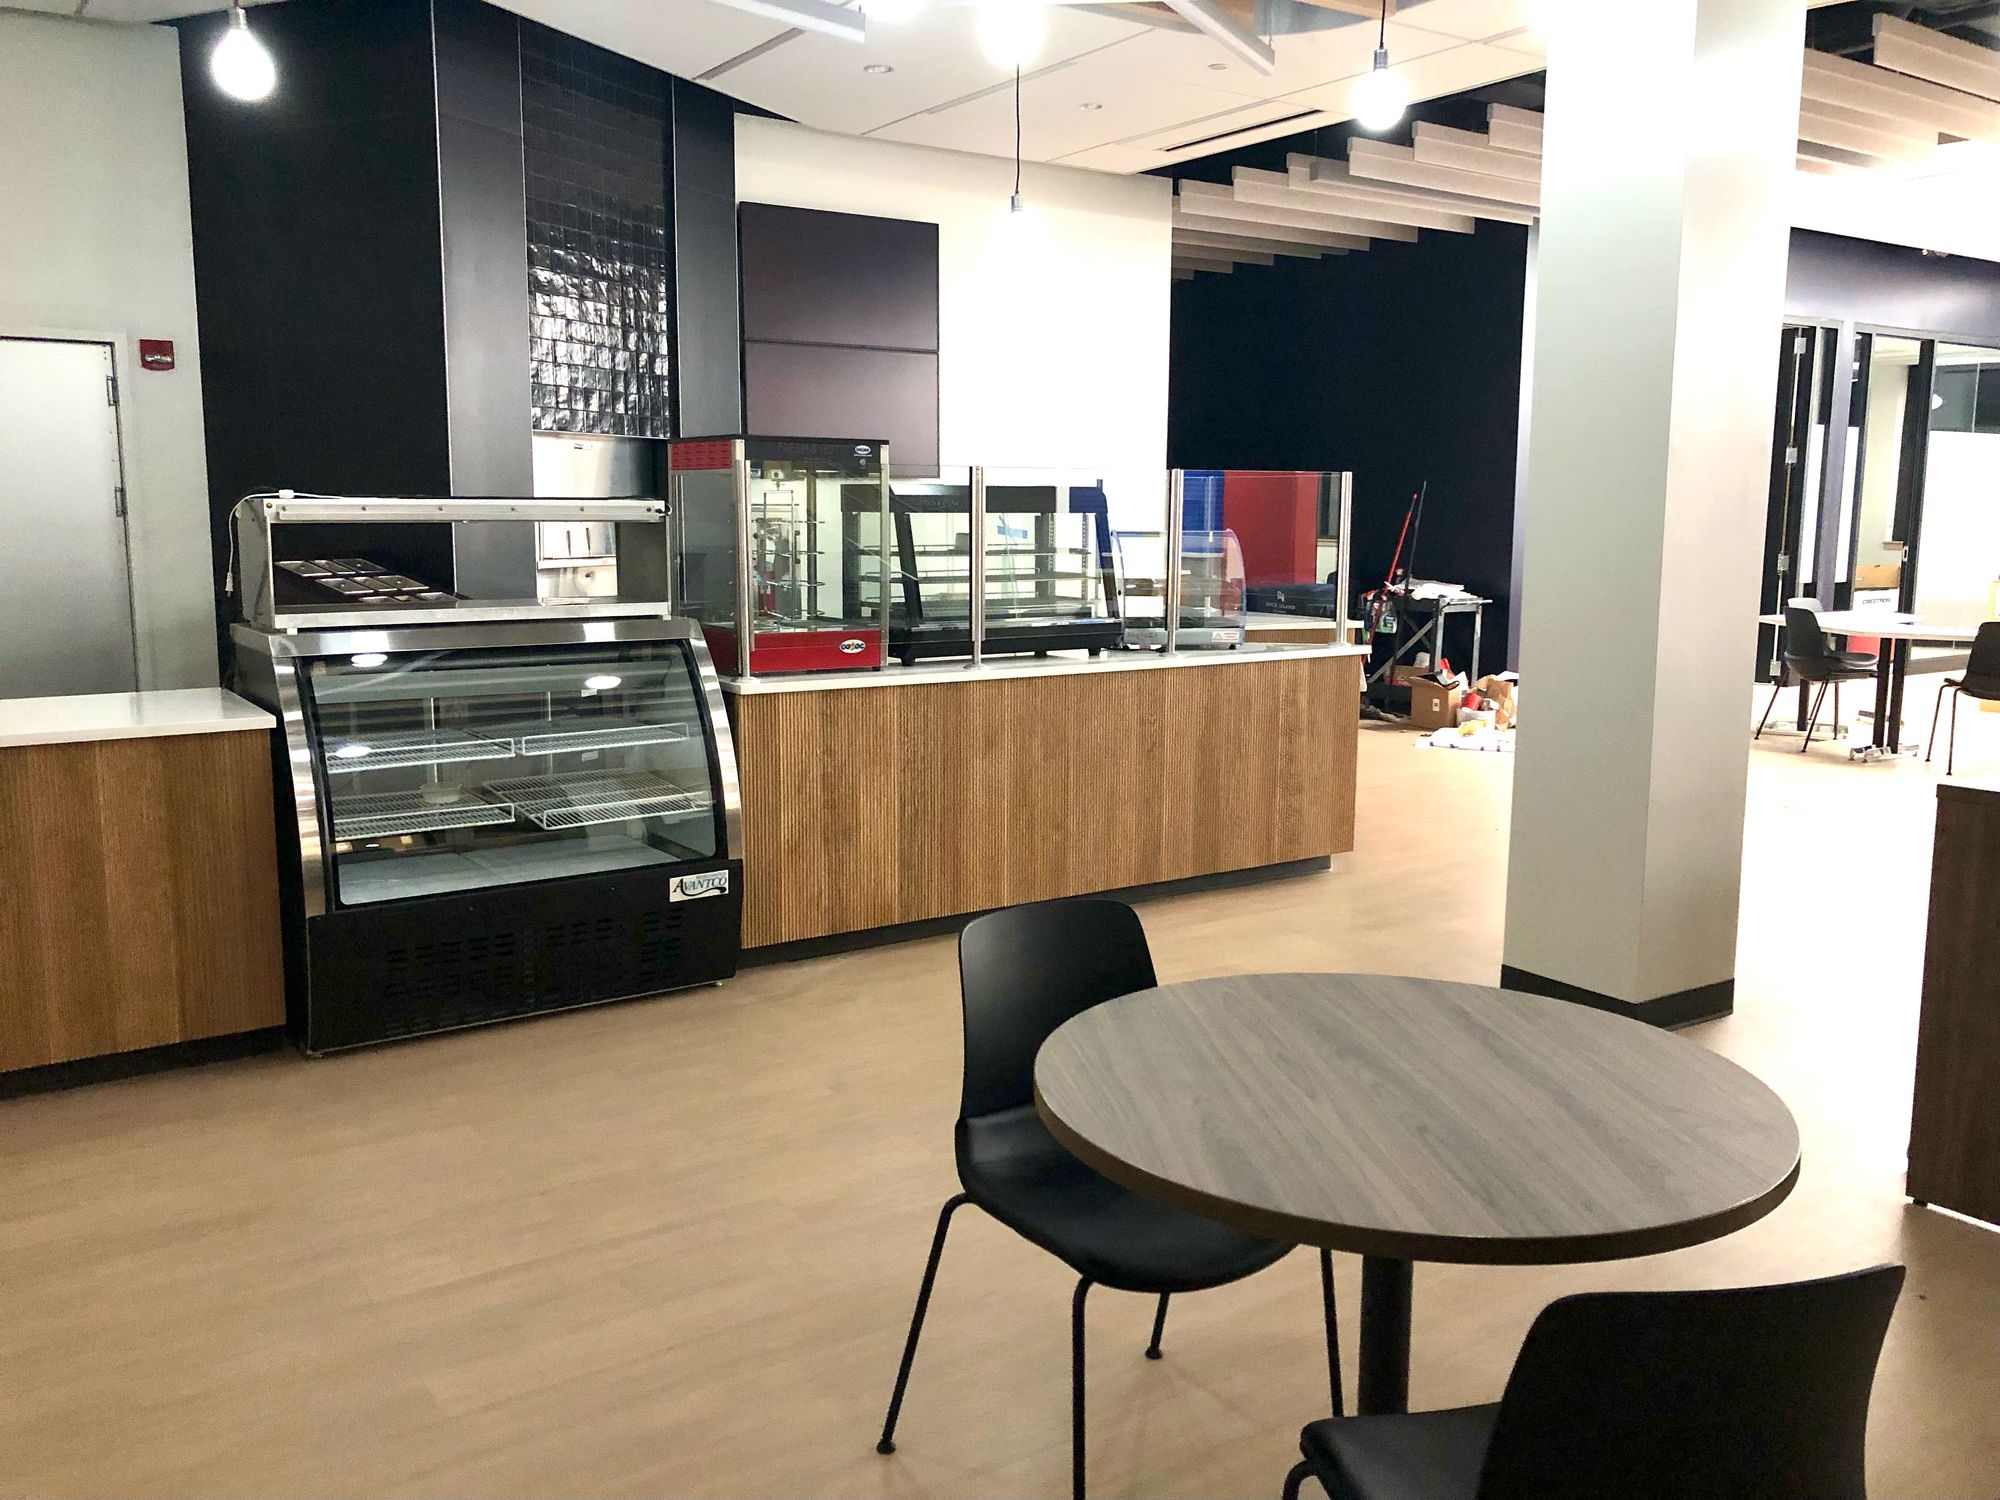 On-campus coffee shop will be opening after winter break